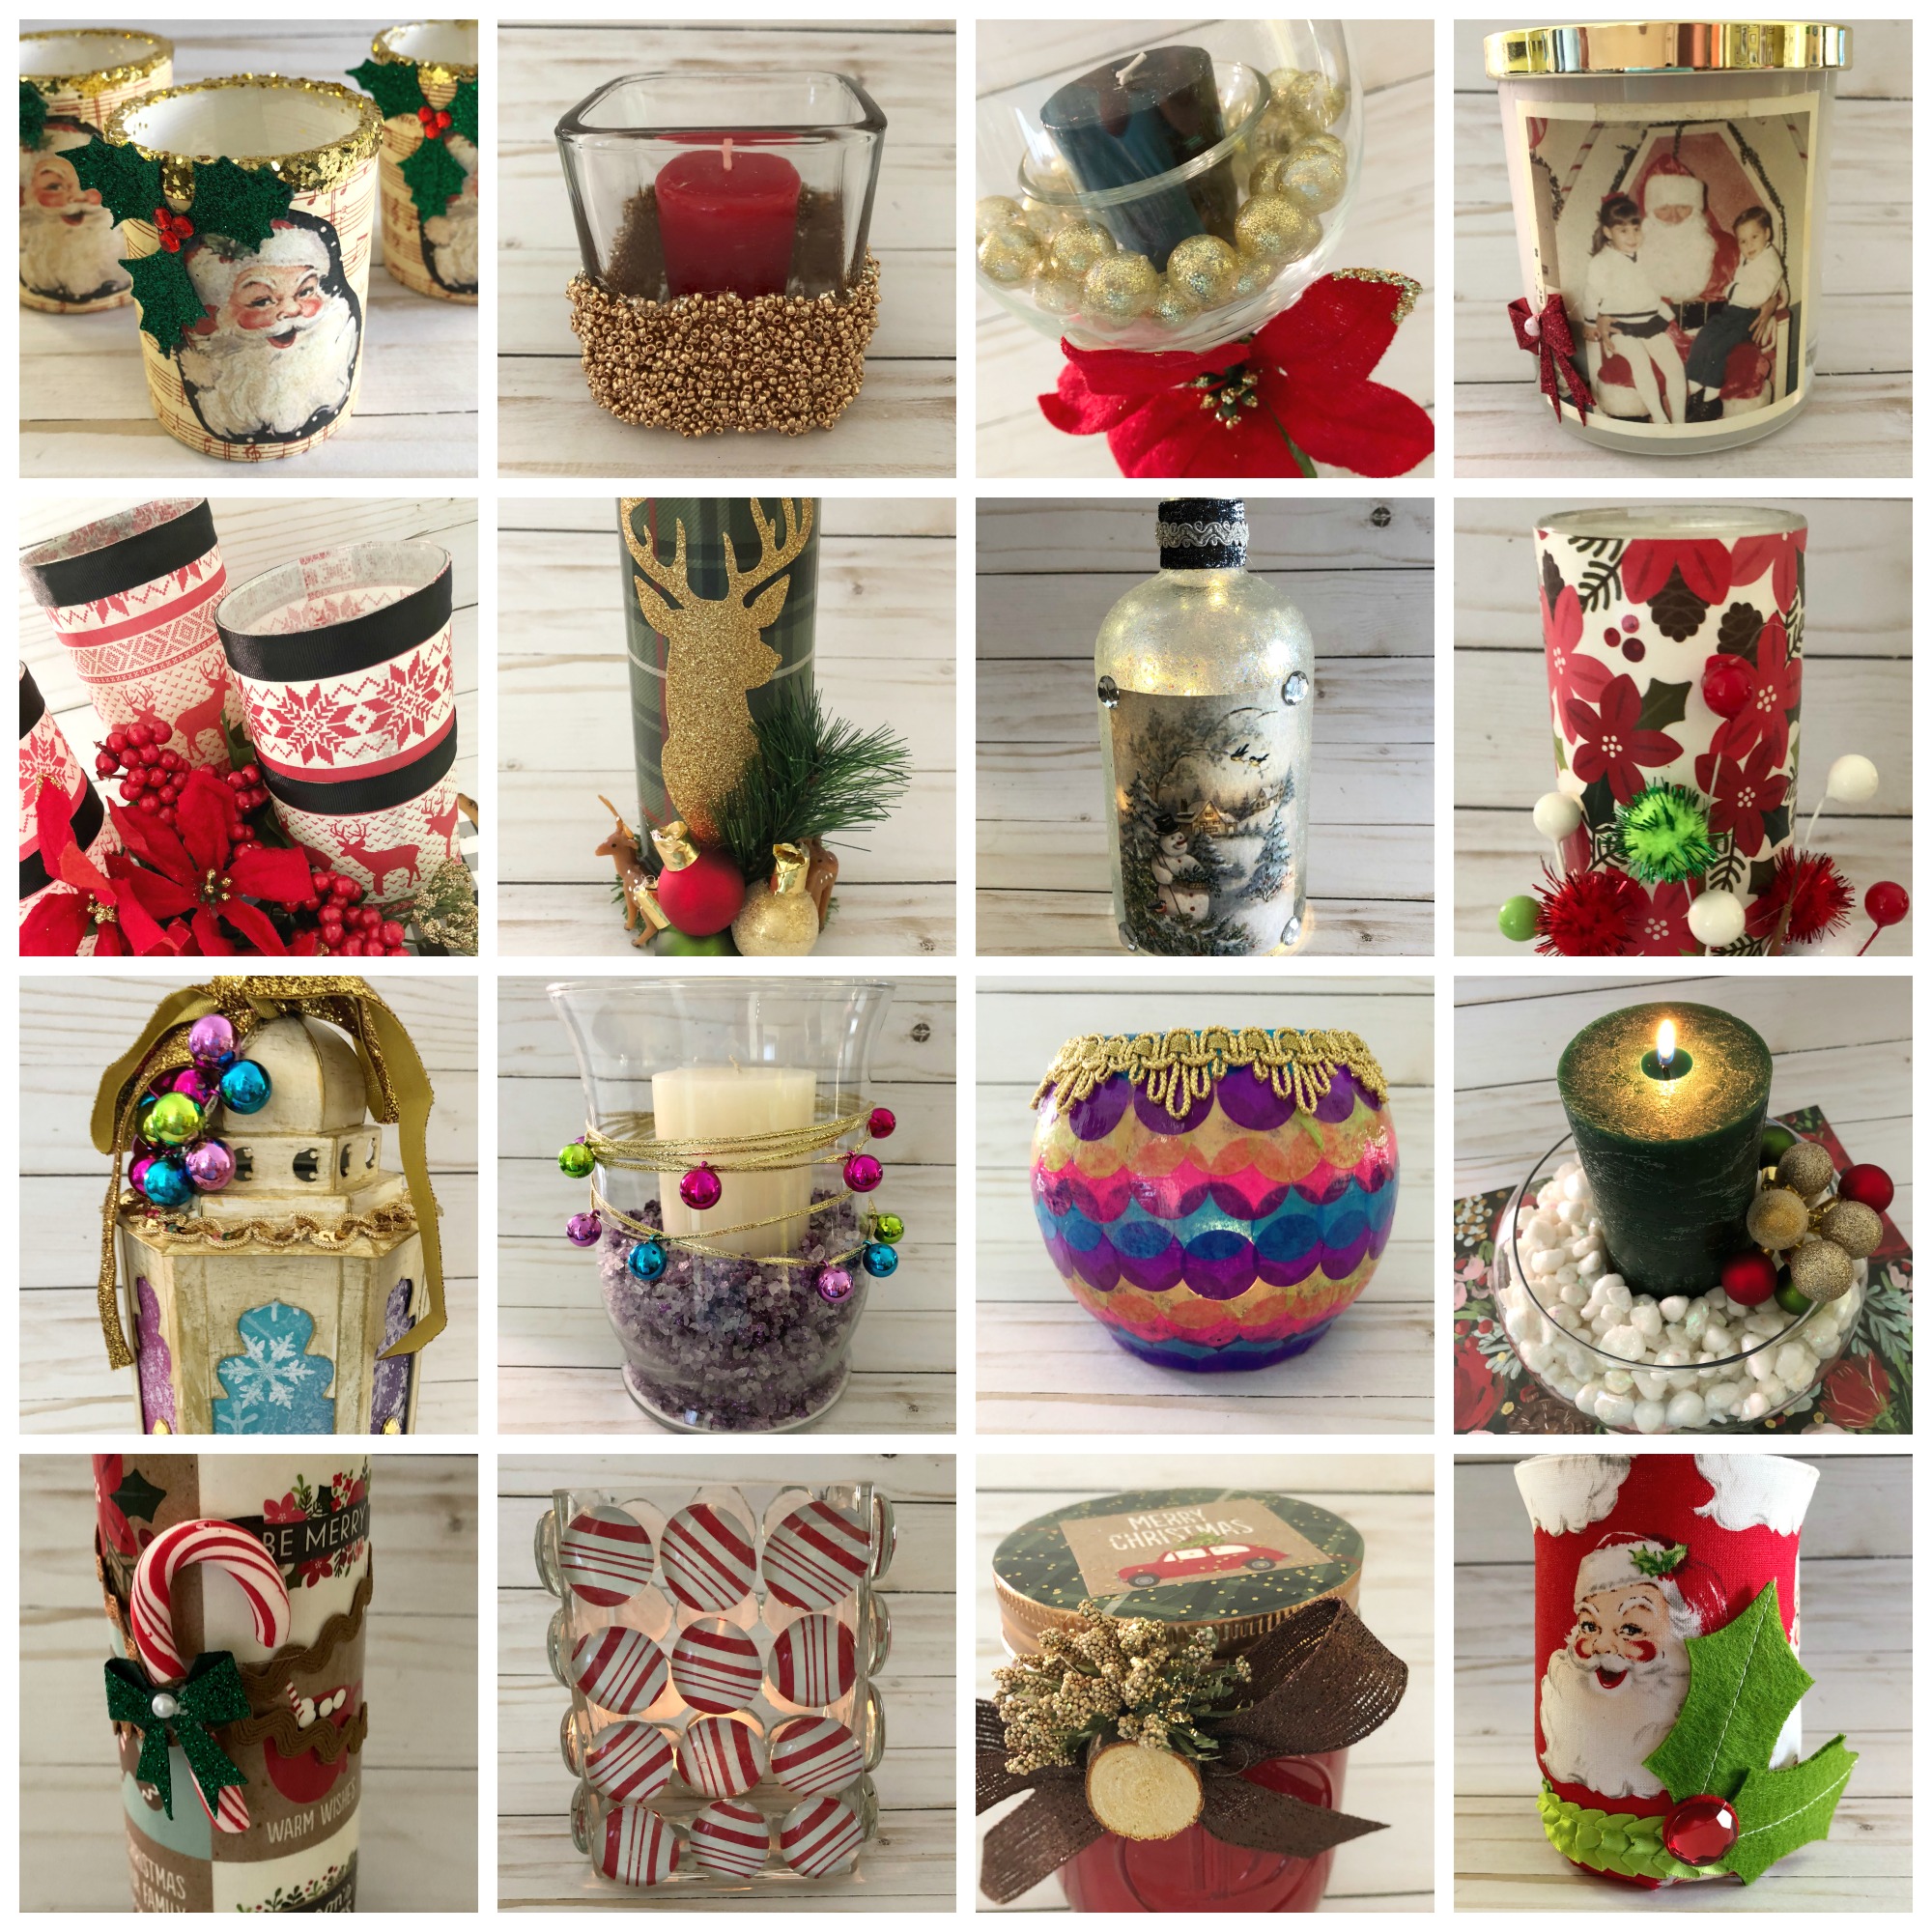 Christmas Crafts for Adults You'll Love - Mod Podge Rocks